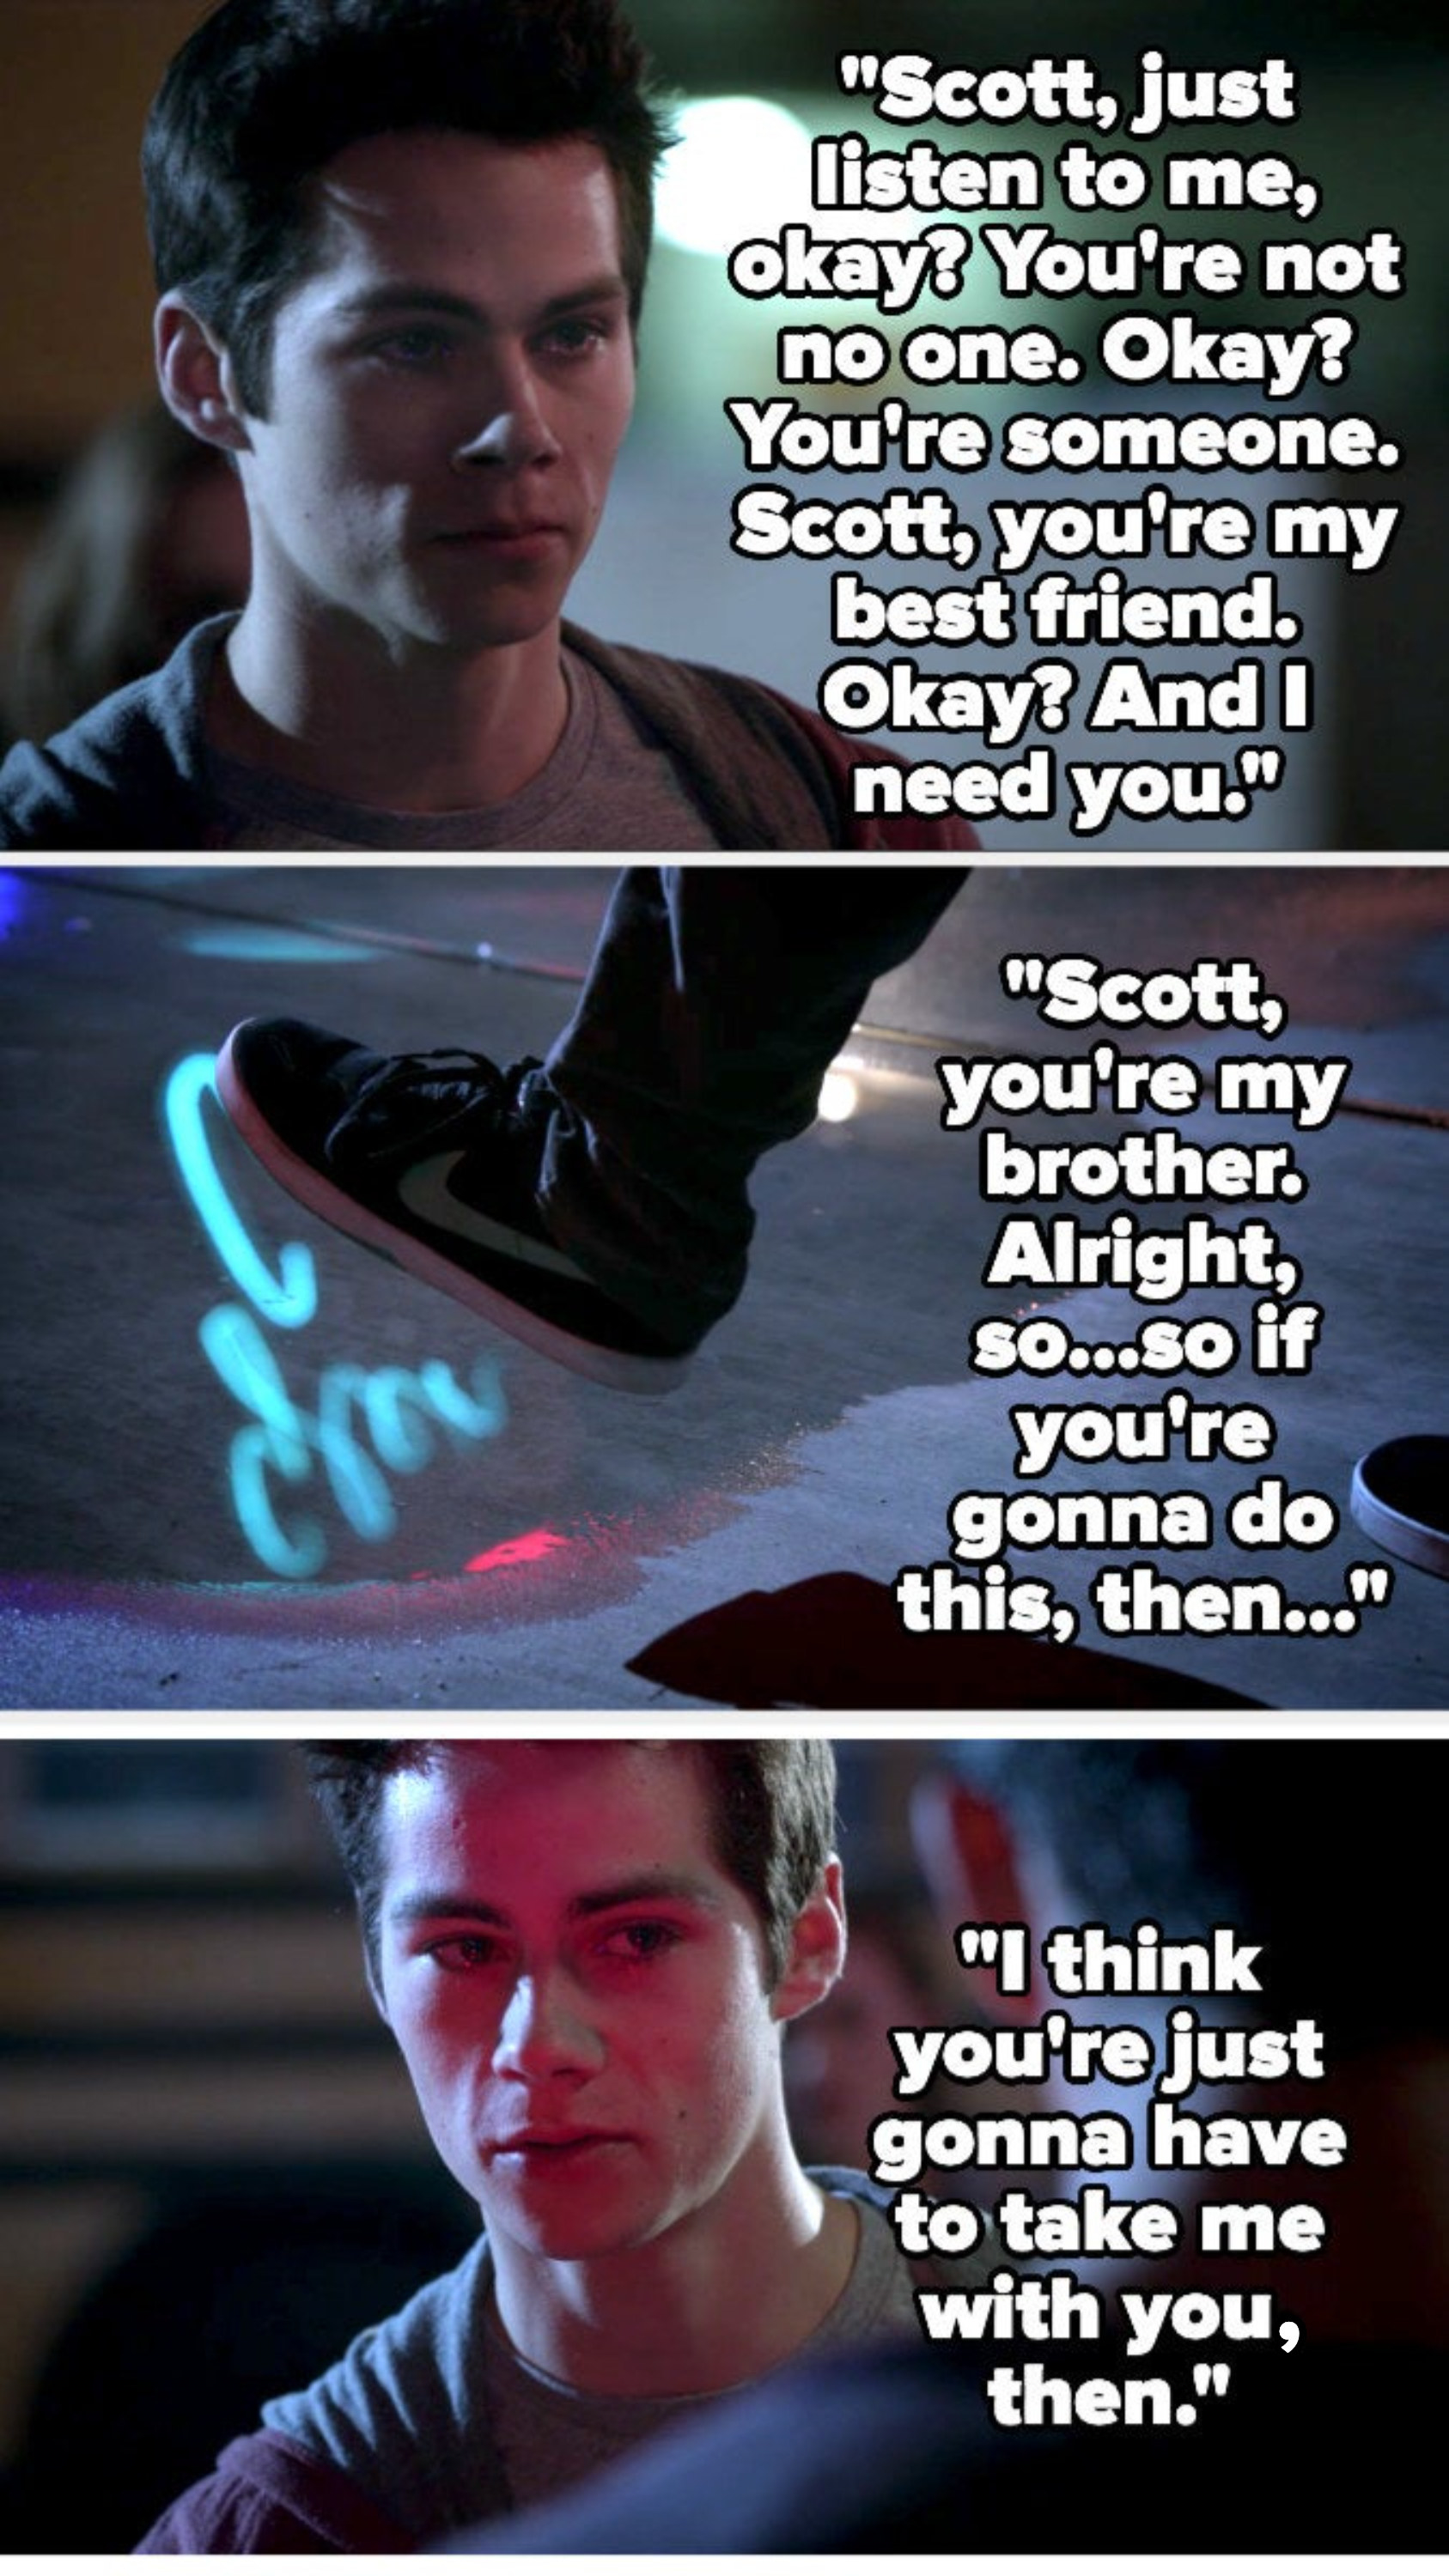 Stiles calls Scott his best friend and brother, and says if he does this, he&#x27;ll have to take Stiles with him 